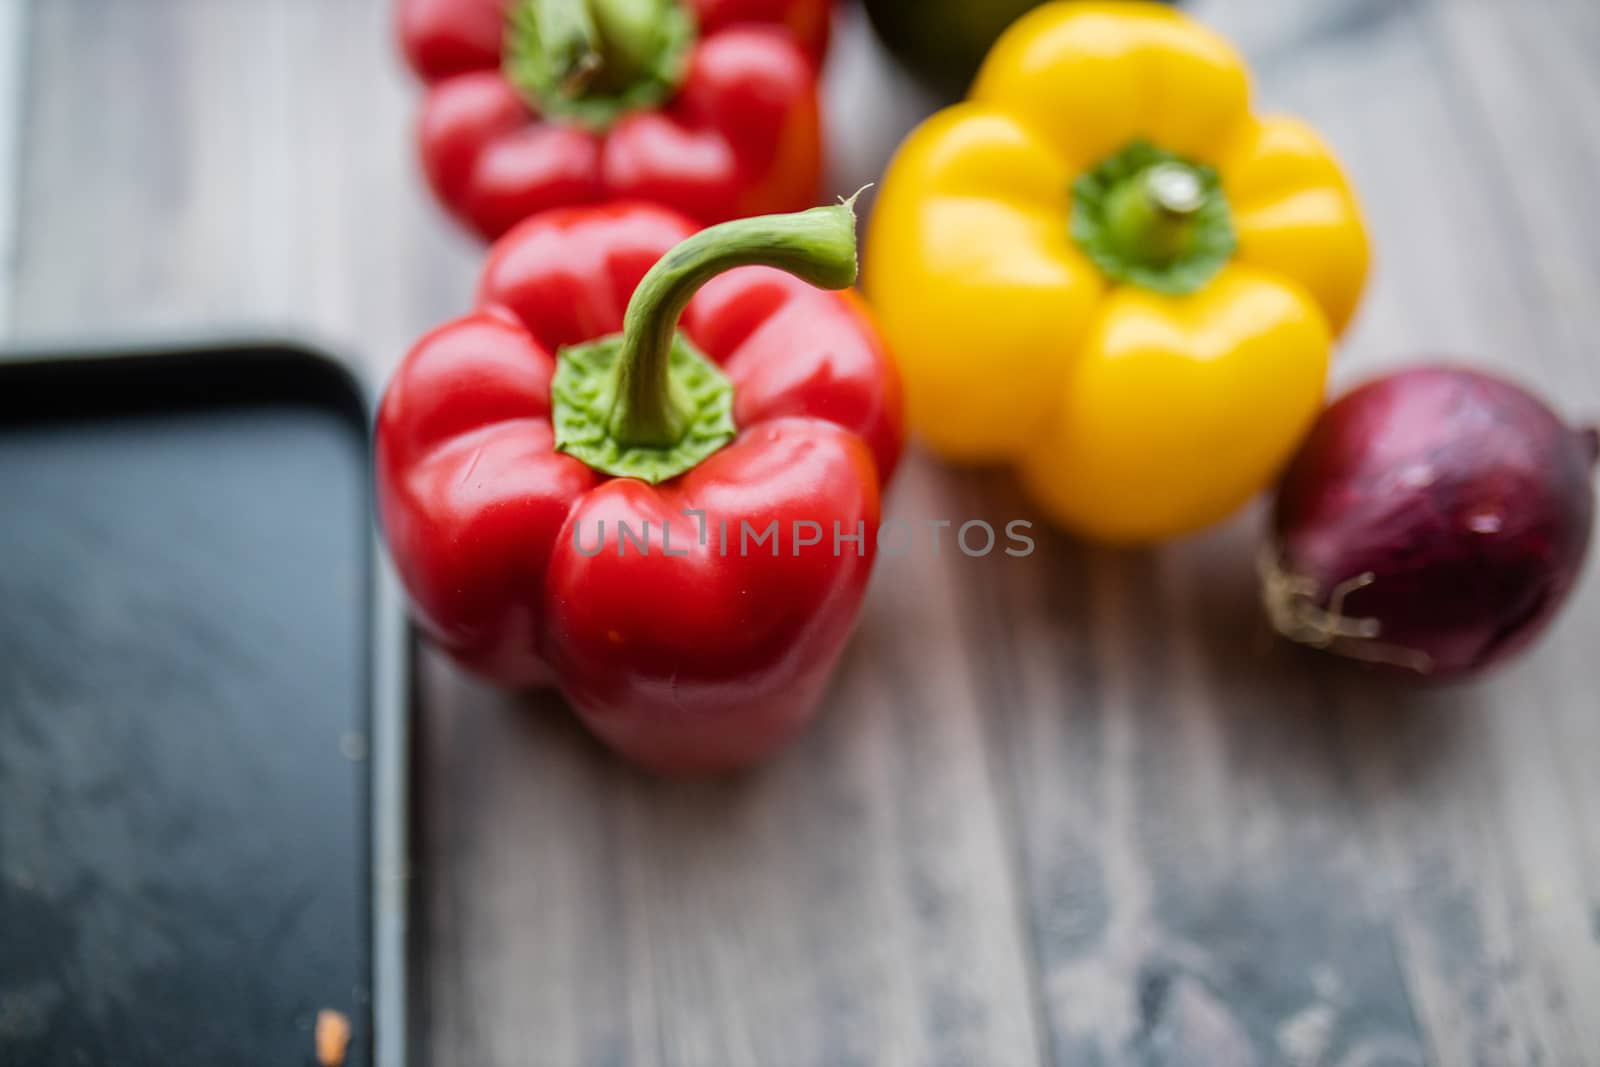 Red and yellow bell peppers up close on a wooden table. Fresh and colorful vegetables on table.Vegan meal ingredients